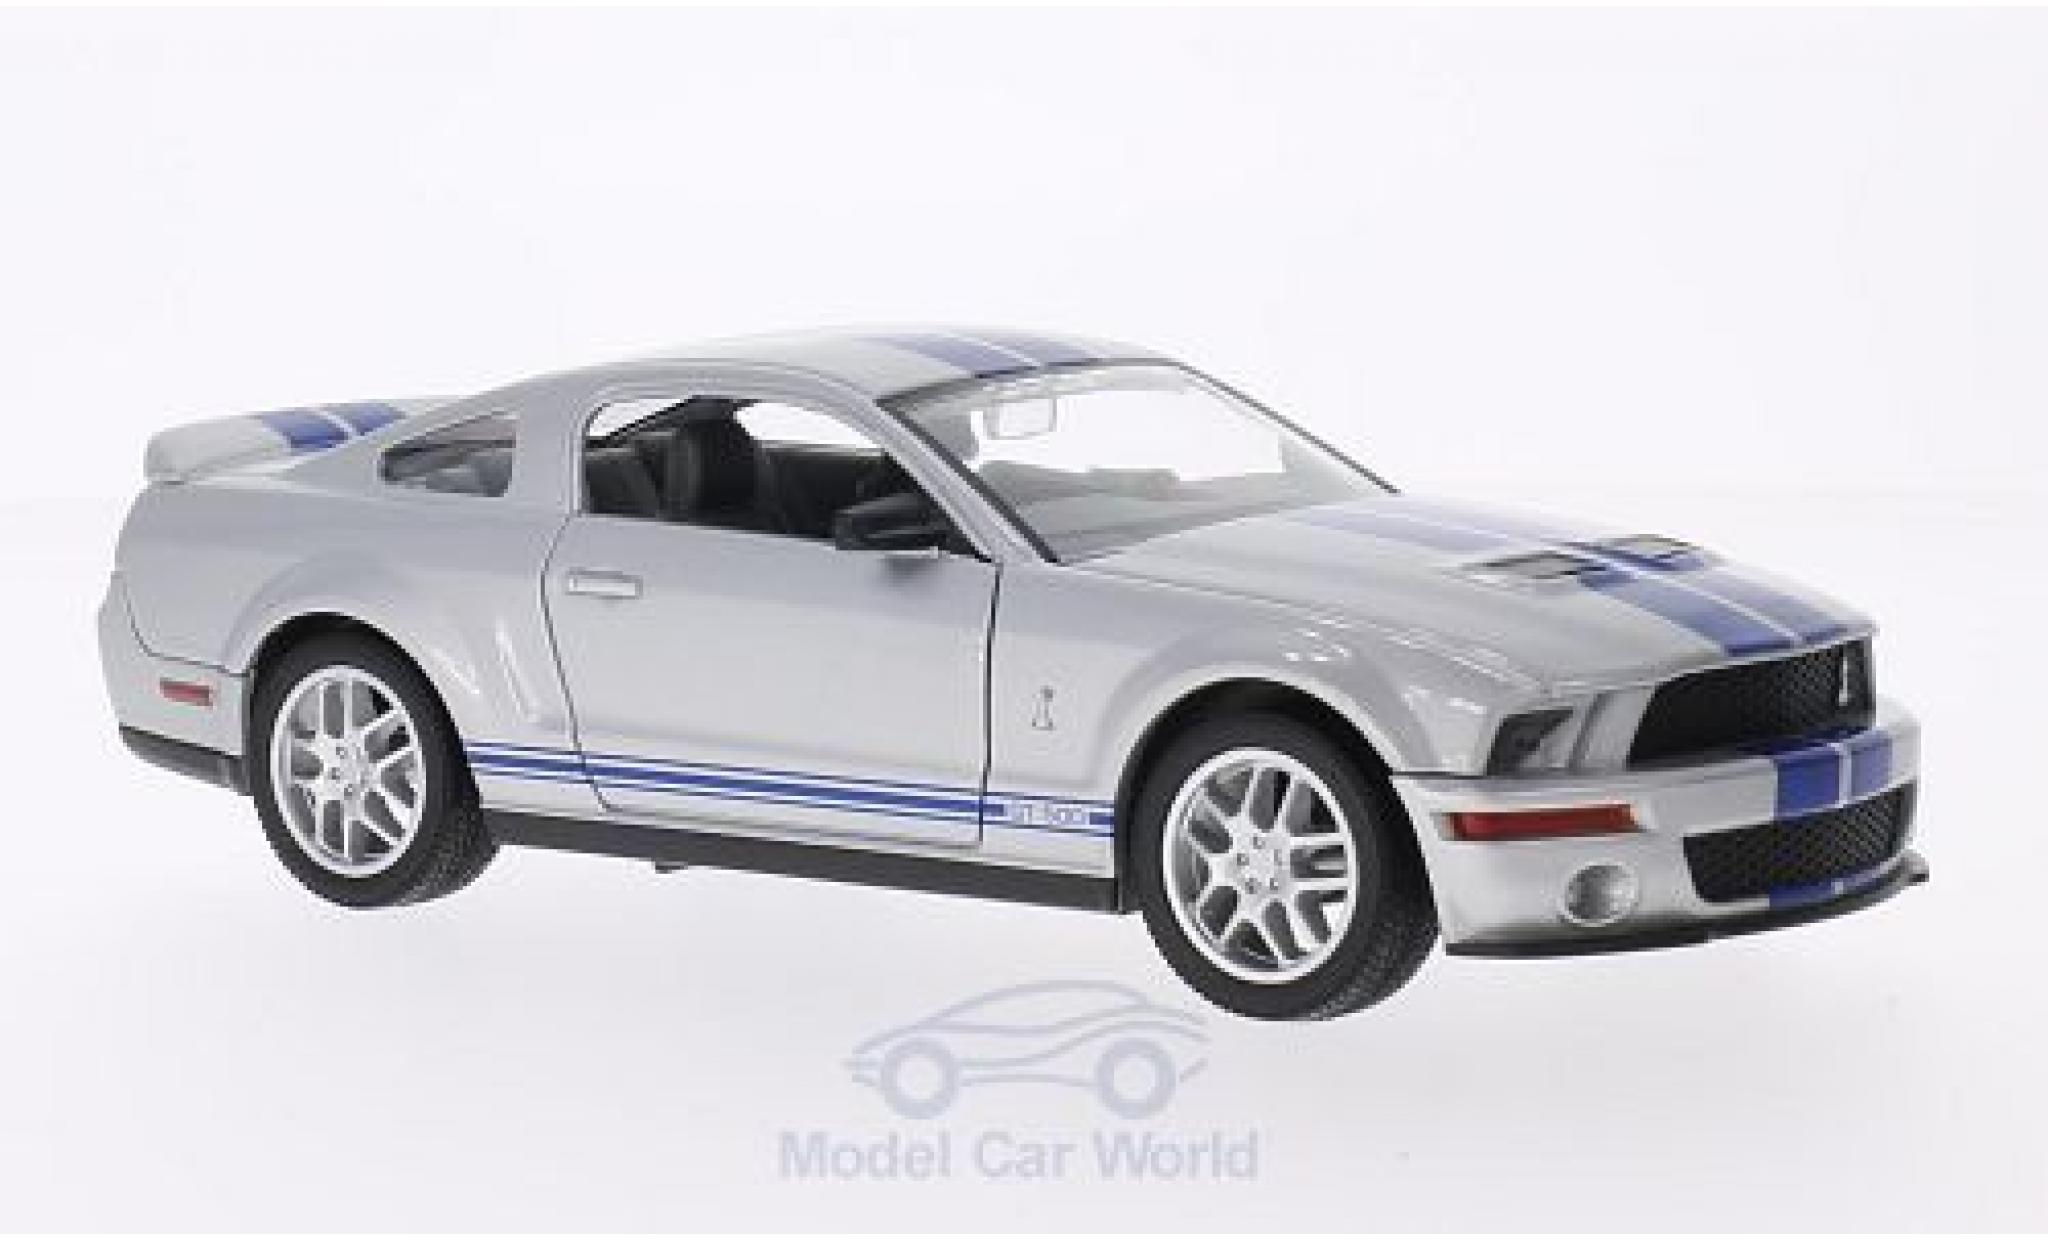 2022 Ford Mustang Shelby GT500 KR Dark Silver 1/18 Scale Diecast Model Car  by SOLIDO S1805908 